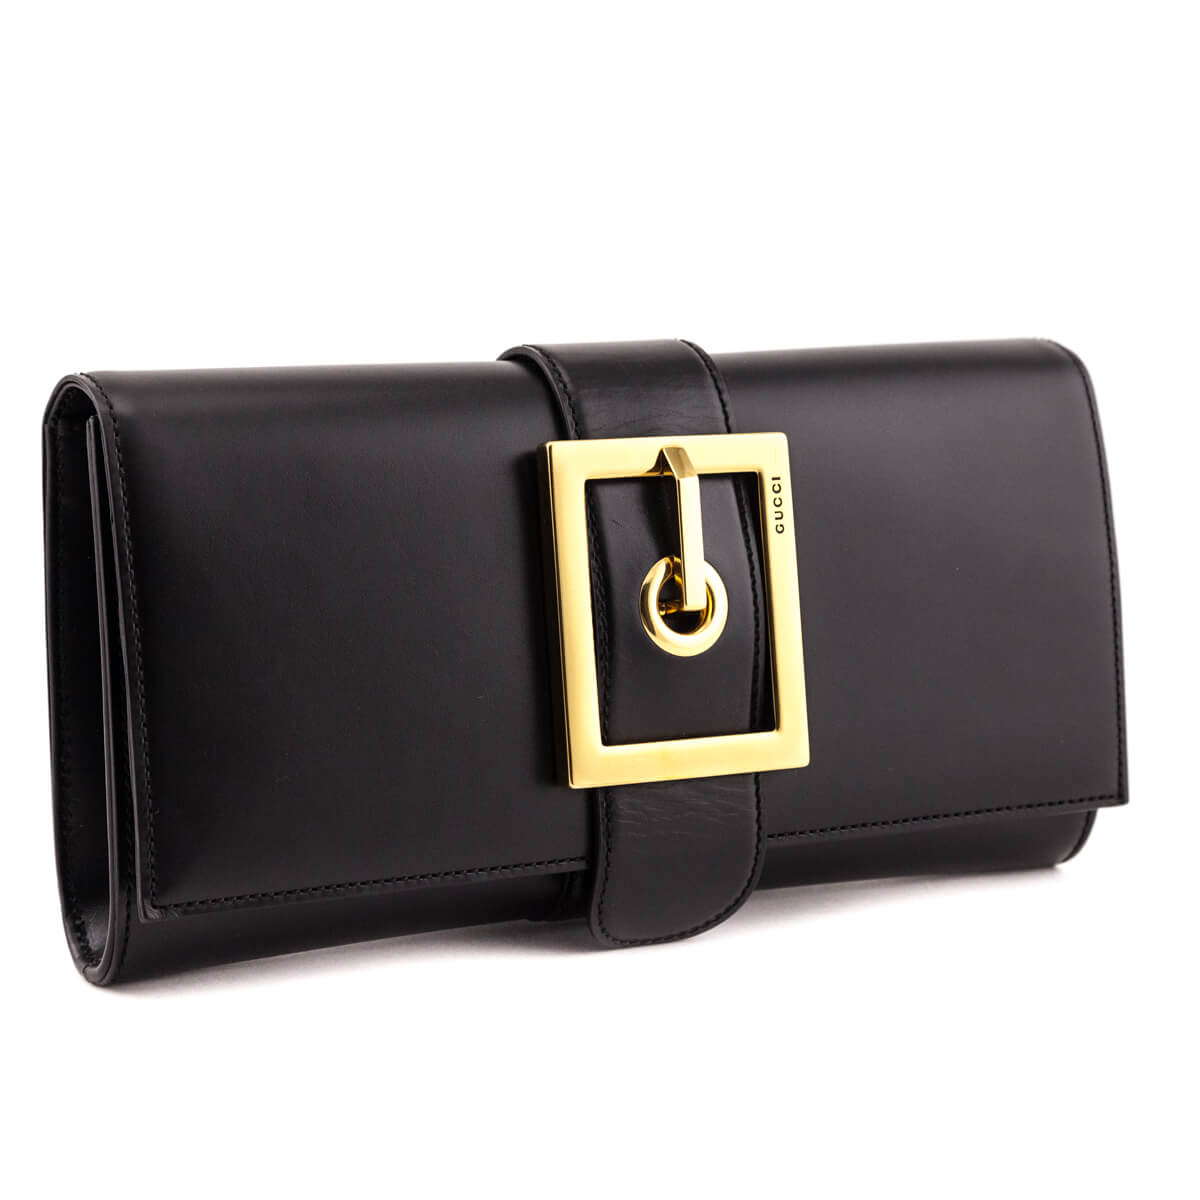 Gucci Black Leather Lady Buckle Clutch - Love that Bag etc - Preowned Authentic Designer Handbags & Preloved Fashions